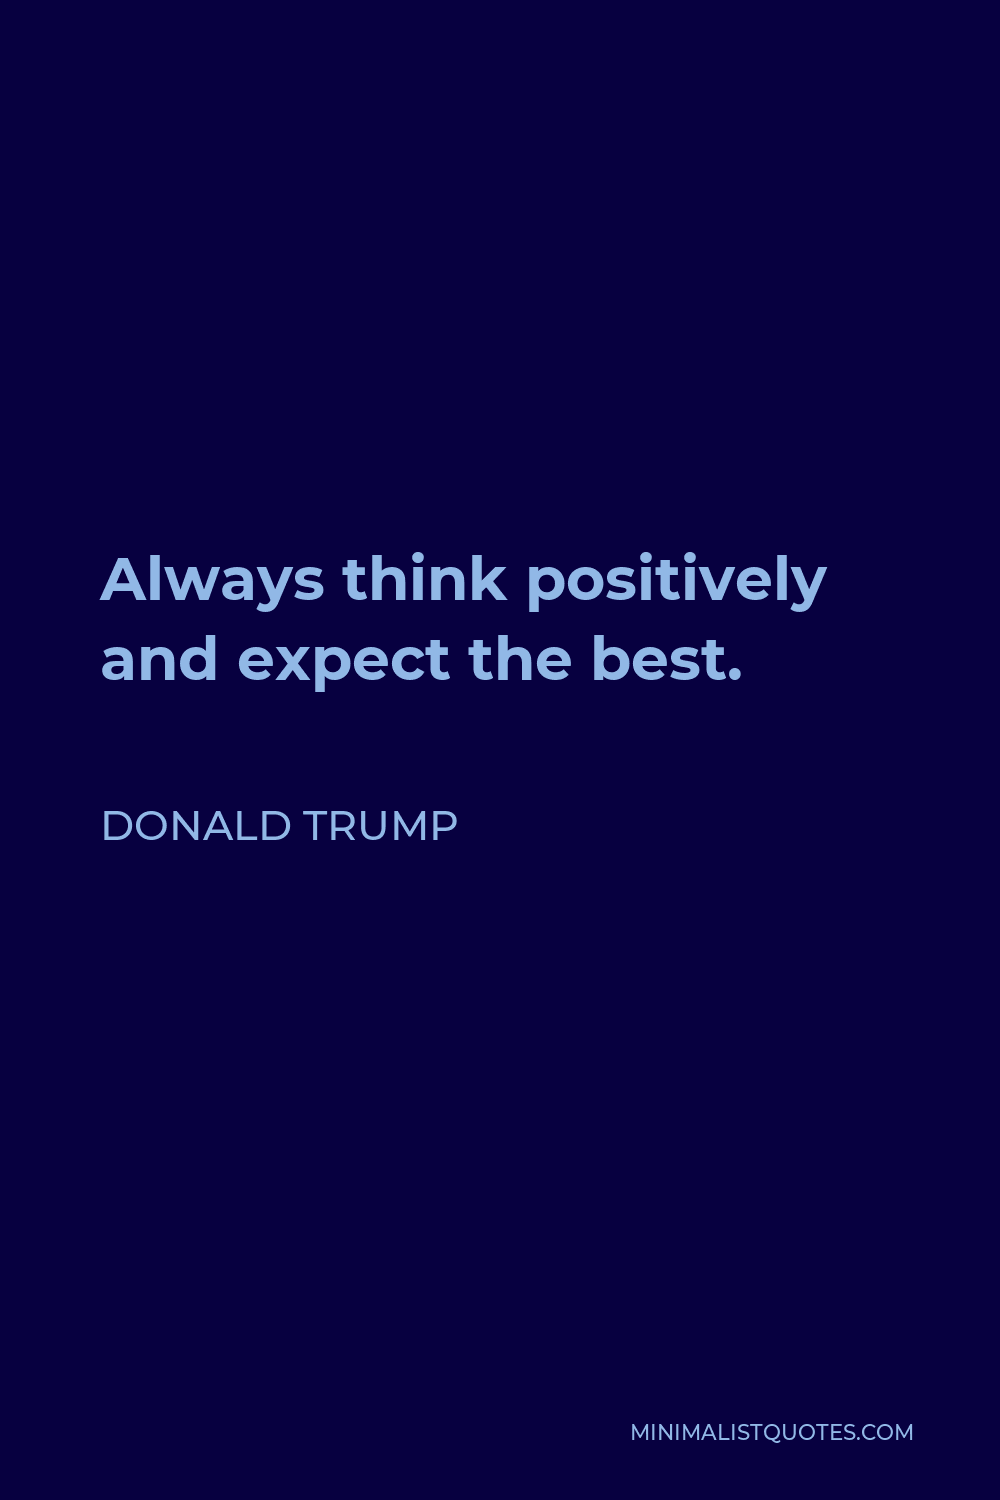 Donald Trump Quote - Always think positively and expect the best.